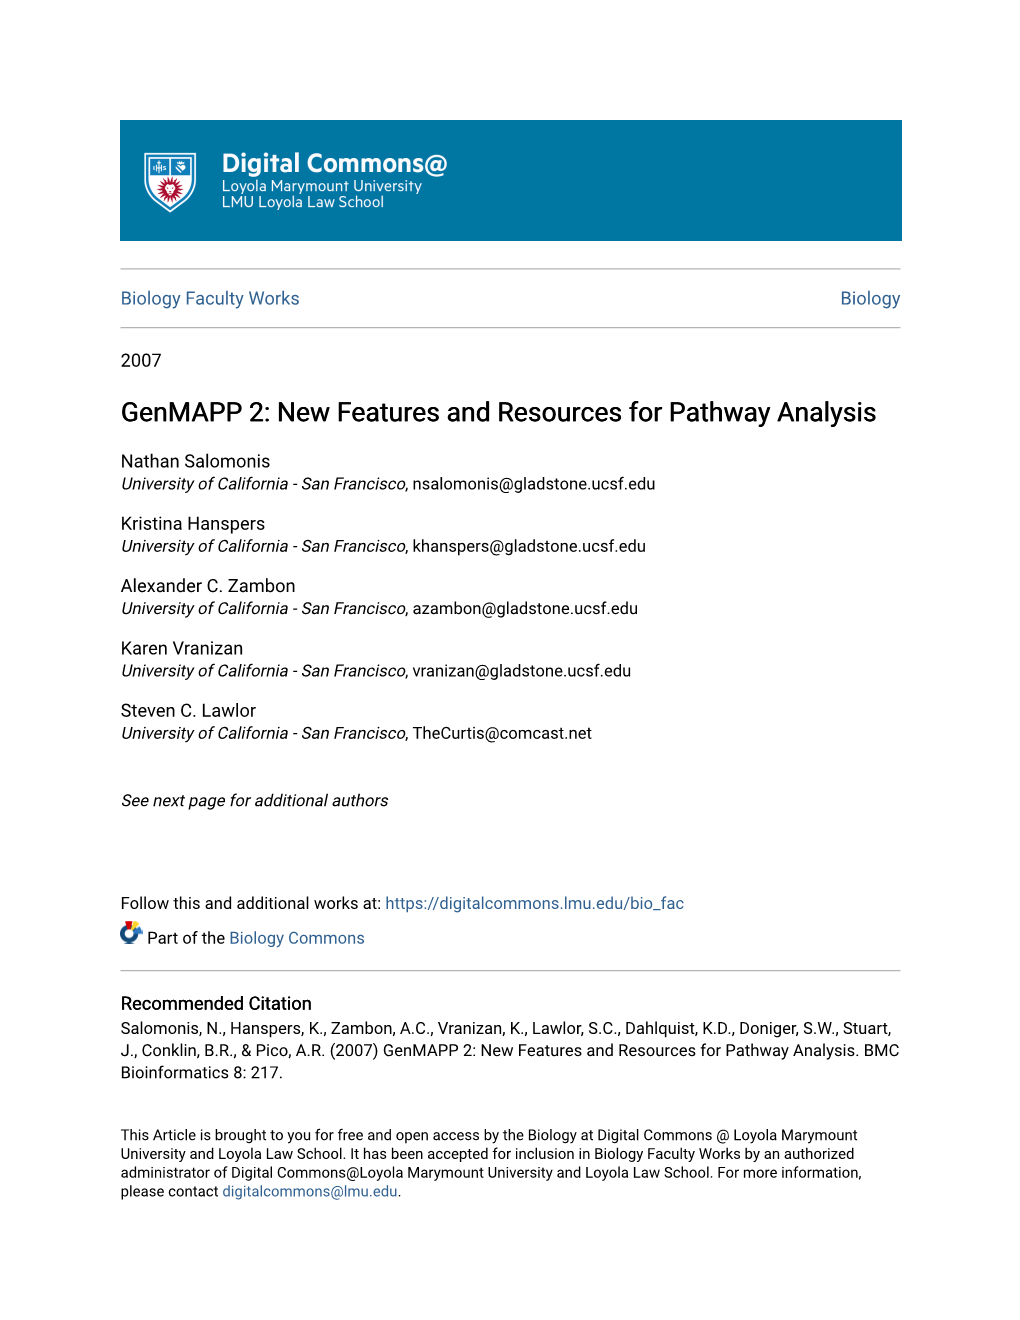 Genmapp 2: New Features and Resources for Pathway Analysis